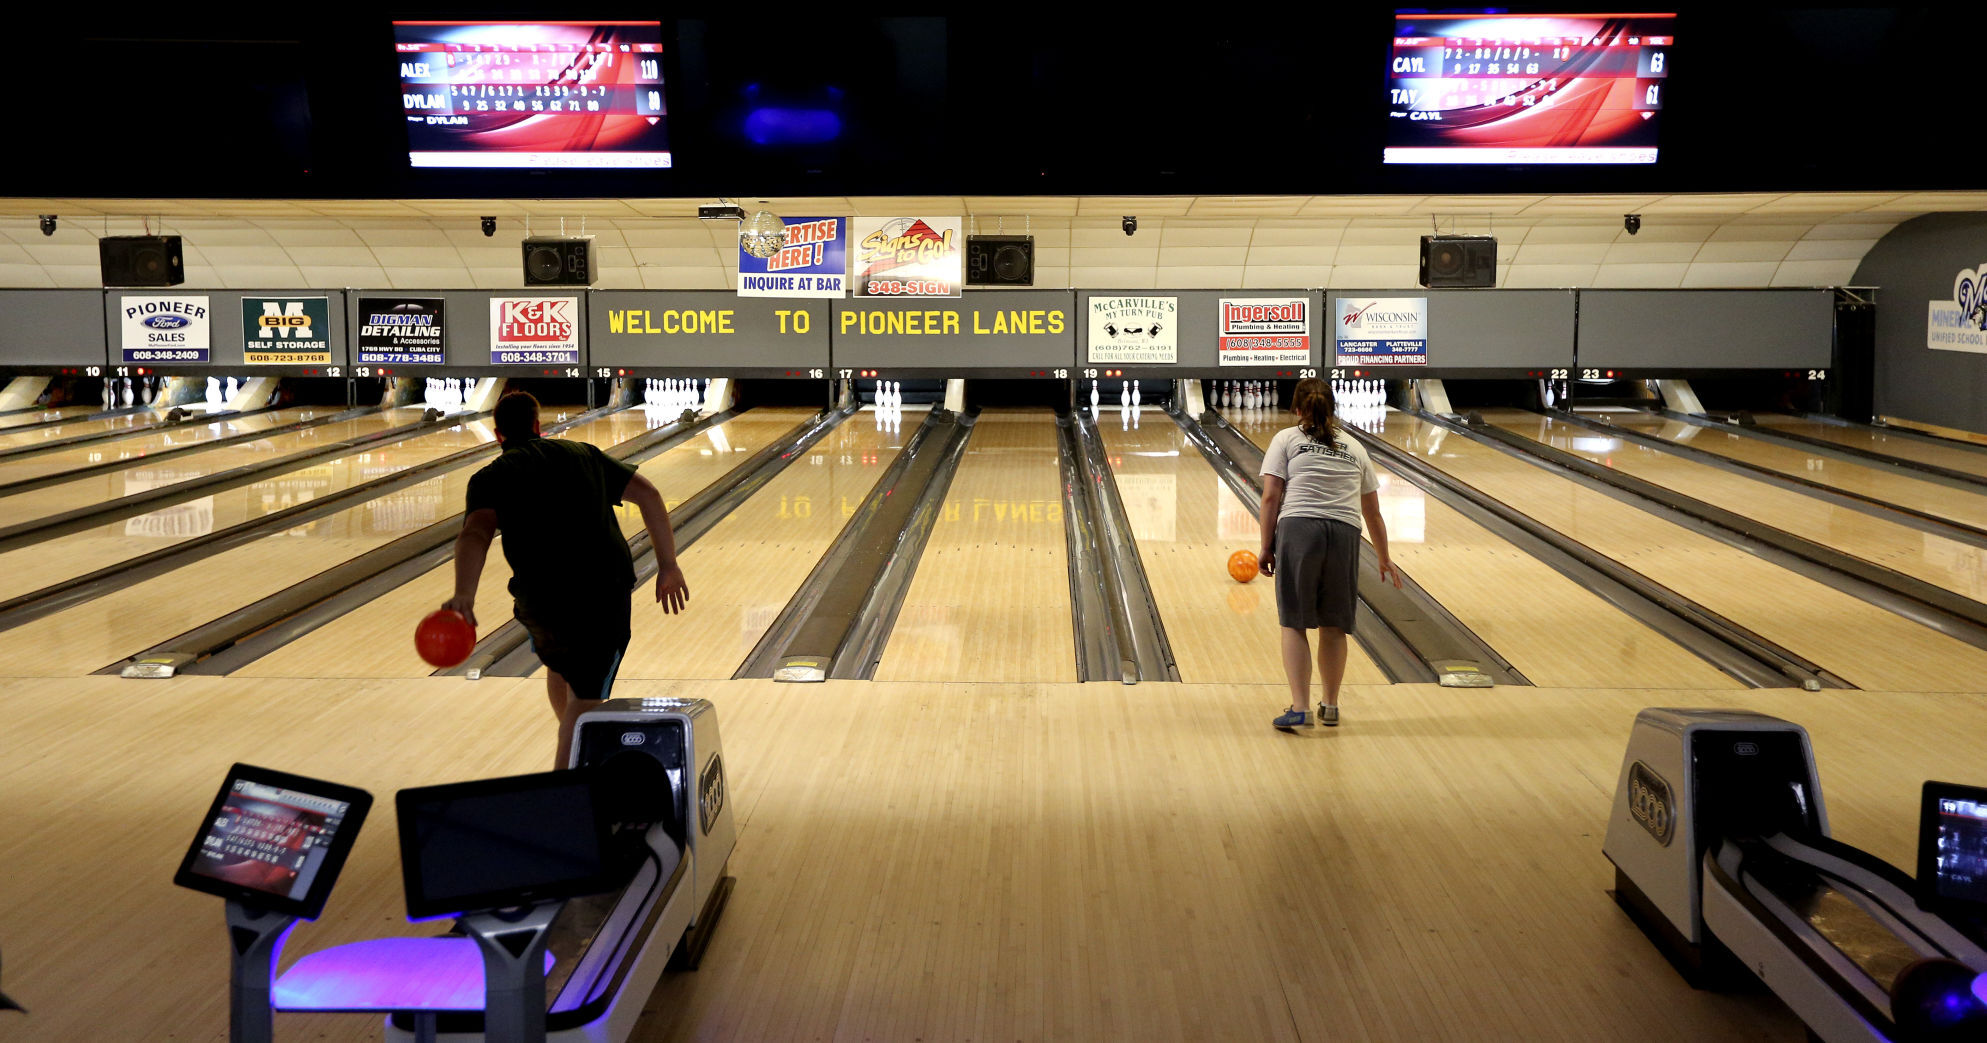 Students from a University of Wisconsin-Platteville class bowl at Pioneer Lanes in Platteville, Wis., on Thursday, Sept. 24, 2020. PHOTO CREDIT: Dave Kettering